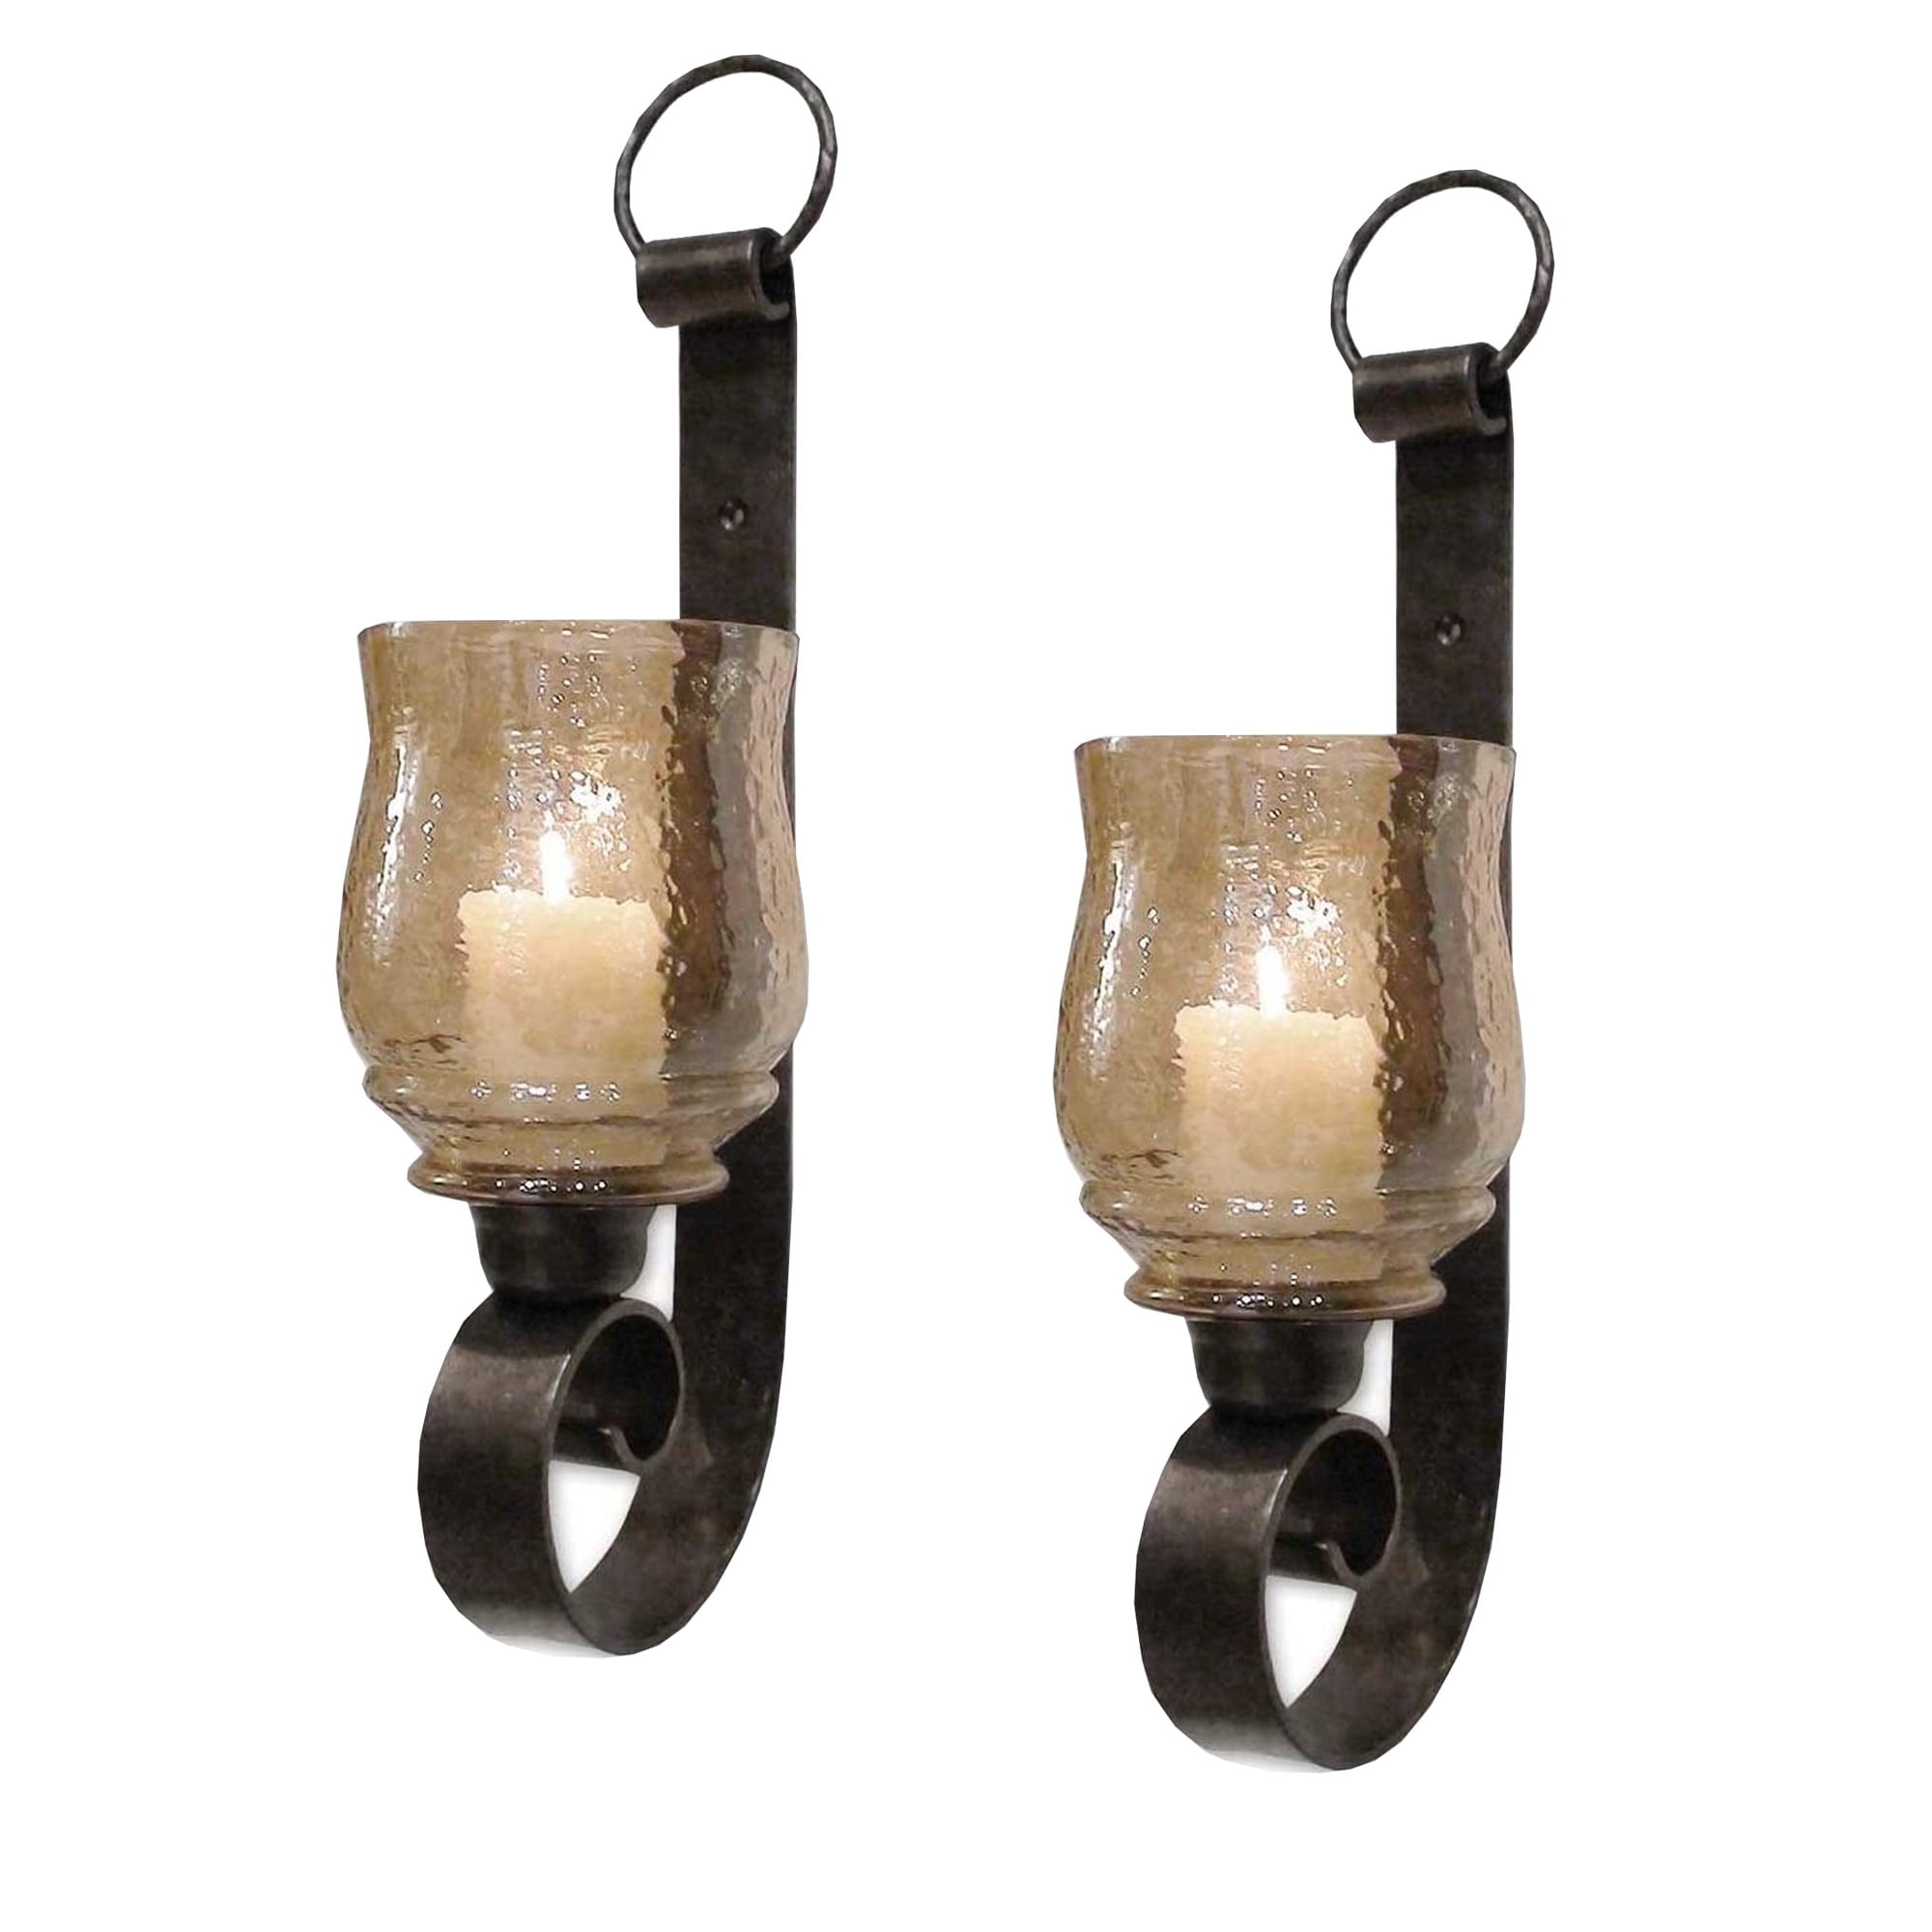 with Glass Pillar Gold Kate and Laurel Curran Hexagon Metal Sconce Wall Candle Holder